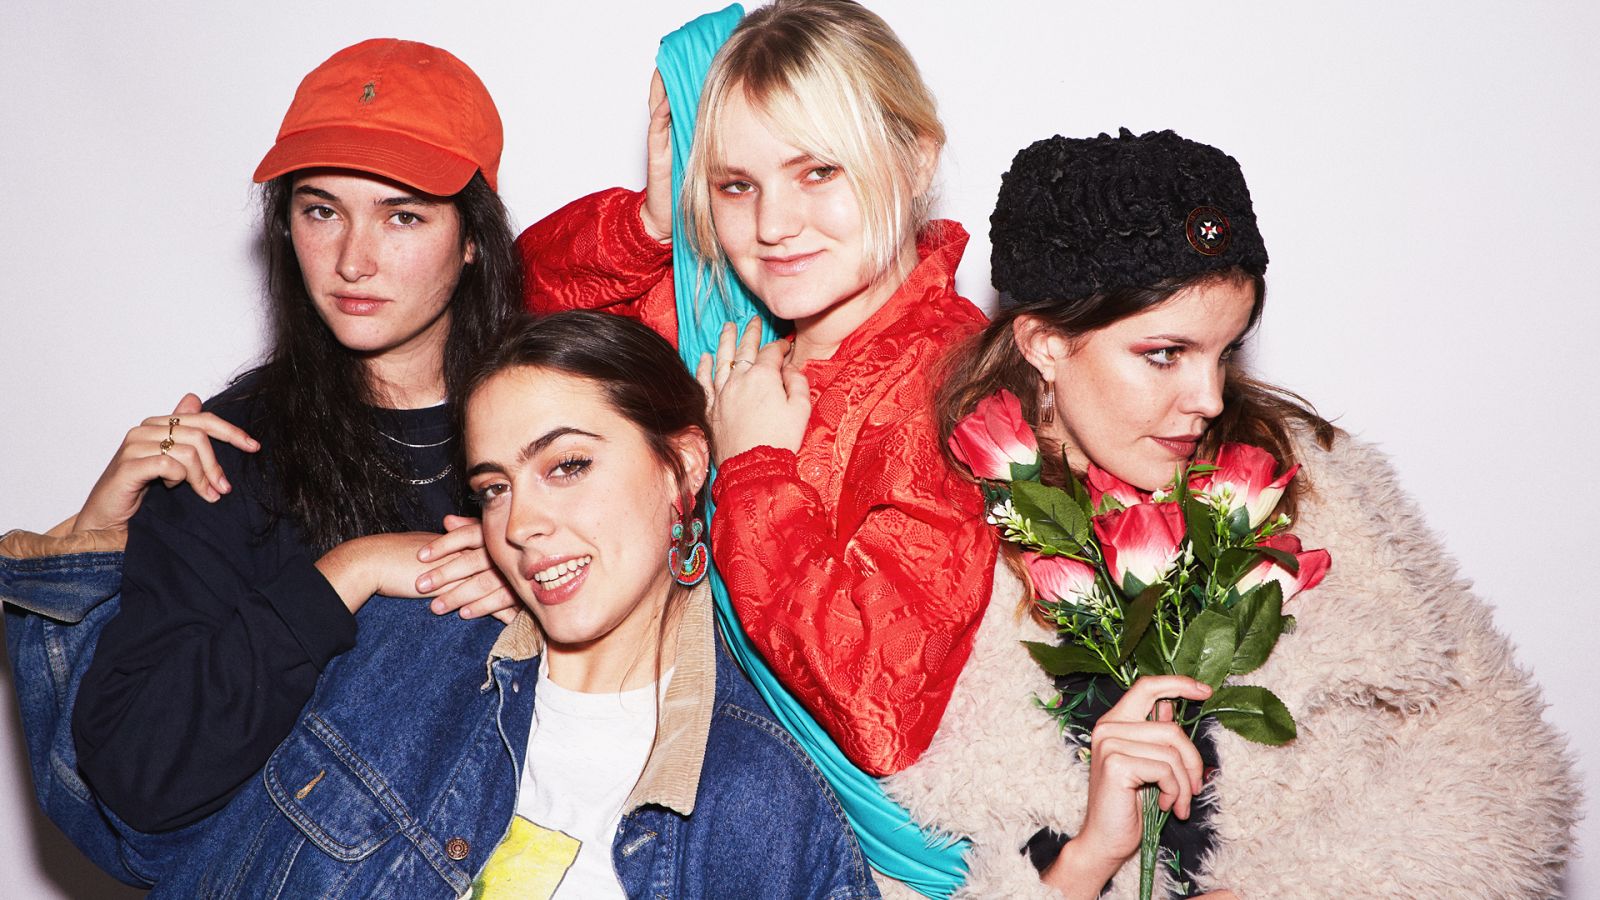 Hinds New For You video